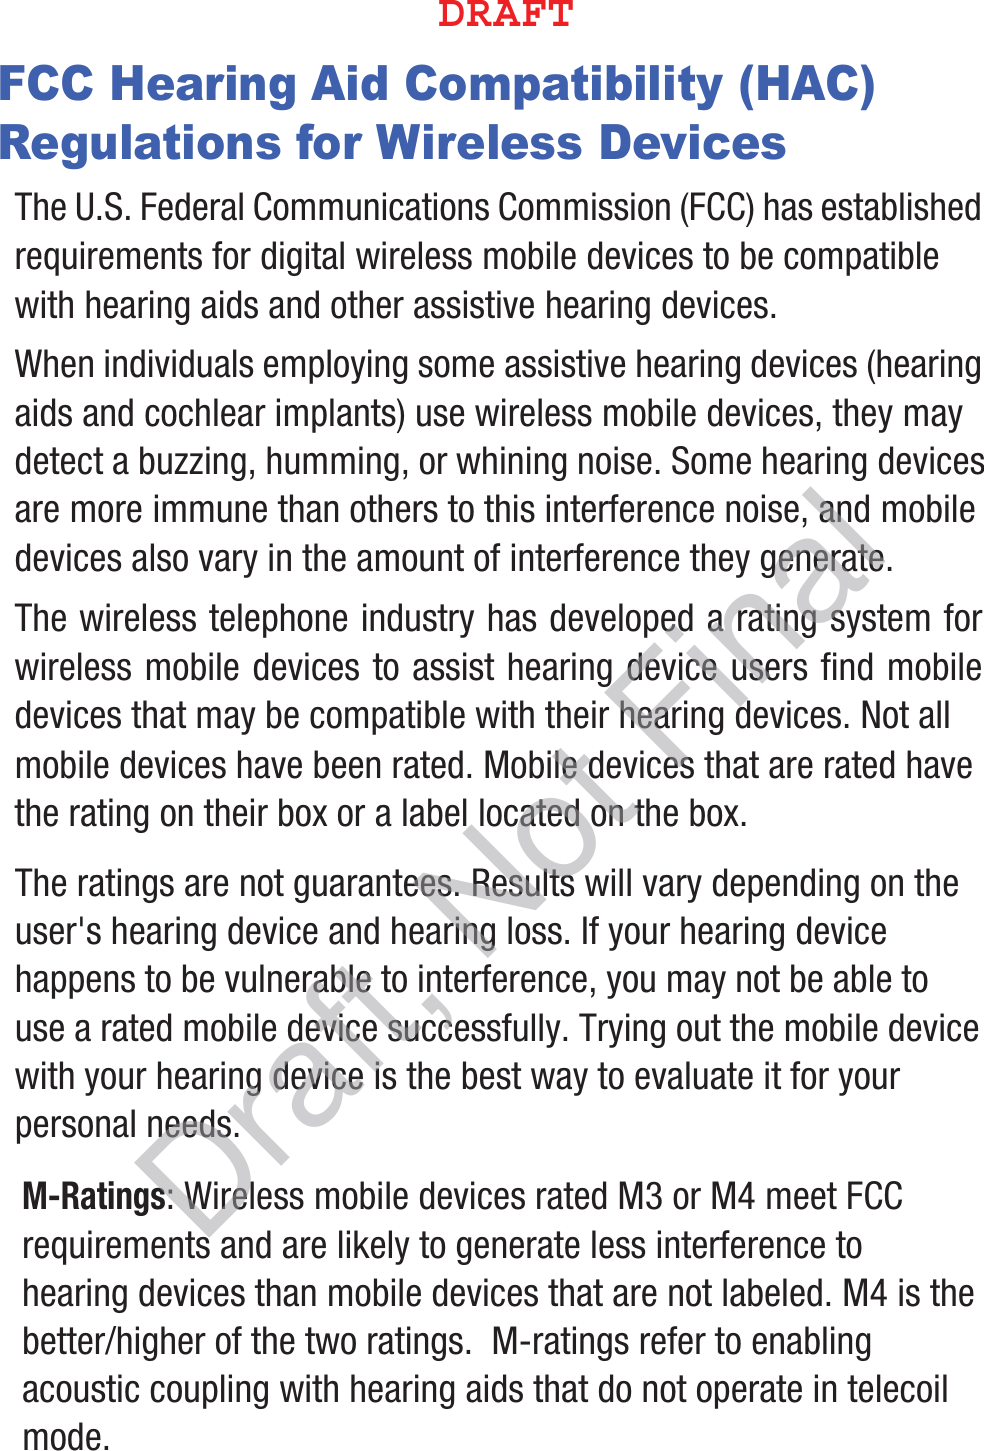 FCC Hearing Aid Compatibility (HAC) Regulations for Wireless DevicesThe U.S. Federal Communications Commission (FCC) has established requirements for digital wireless mobile devices to be compatible with hearing aids and other assistive hearing devices.When individuals employing some assistive hearing devices (hearing aids and cochlear implants) use wireless mobile devices, they may detect a buzzing, humming, or whining noise. Some hearing devices are more immune than others to this interference noise, and mobile devices also vary in the amount of interference they generate.The wireless telephone industry has developed a rating system for wireless mobile devices to assist hearing device users find mobile devices that may be compatible with their hearing devices. Not all mobile devices have been rated. Mobile devices that are rated have the rating on their box or a label located on the box.The ratings are not guarantees. Results will vary depending on the user&apos;s hearing device and hearing loss. If your hearing device happens to be vulnerable to interference, you may not be able to use a rated mobile device successfully. Trying out the mobile device with your hearing device is the best way to evaluate it for your personal needs.M-Ratings: Wireless mobile devices rated M3 or M4 meet FCC requirements and are likely to generate less interference to hearing devices than mobile devices that are not labeled. M4 is the better/higher of the two ratings.  M-ratings refer to enabling acoustic coupling with hearing aids that do not operate in telecoil mode.%3&quot;&apos;5Draft, Not Final